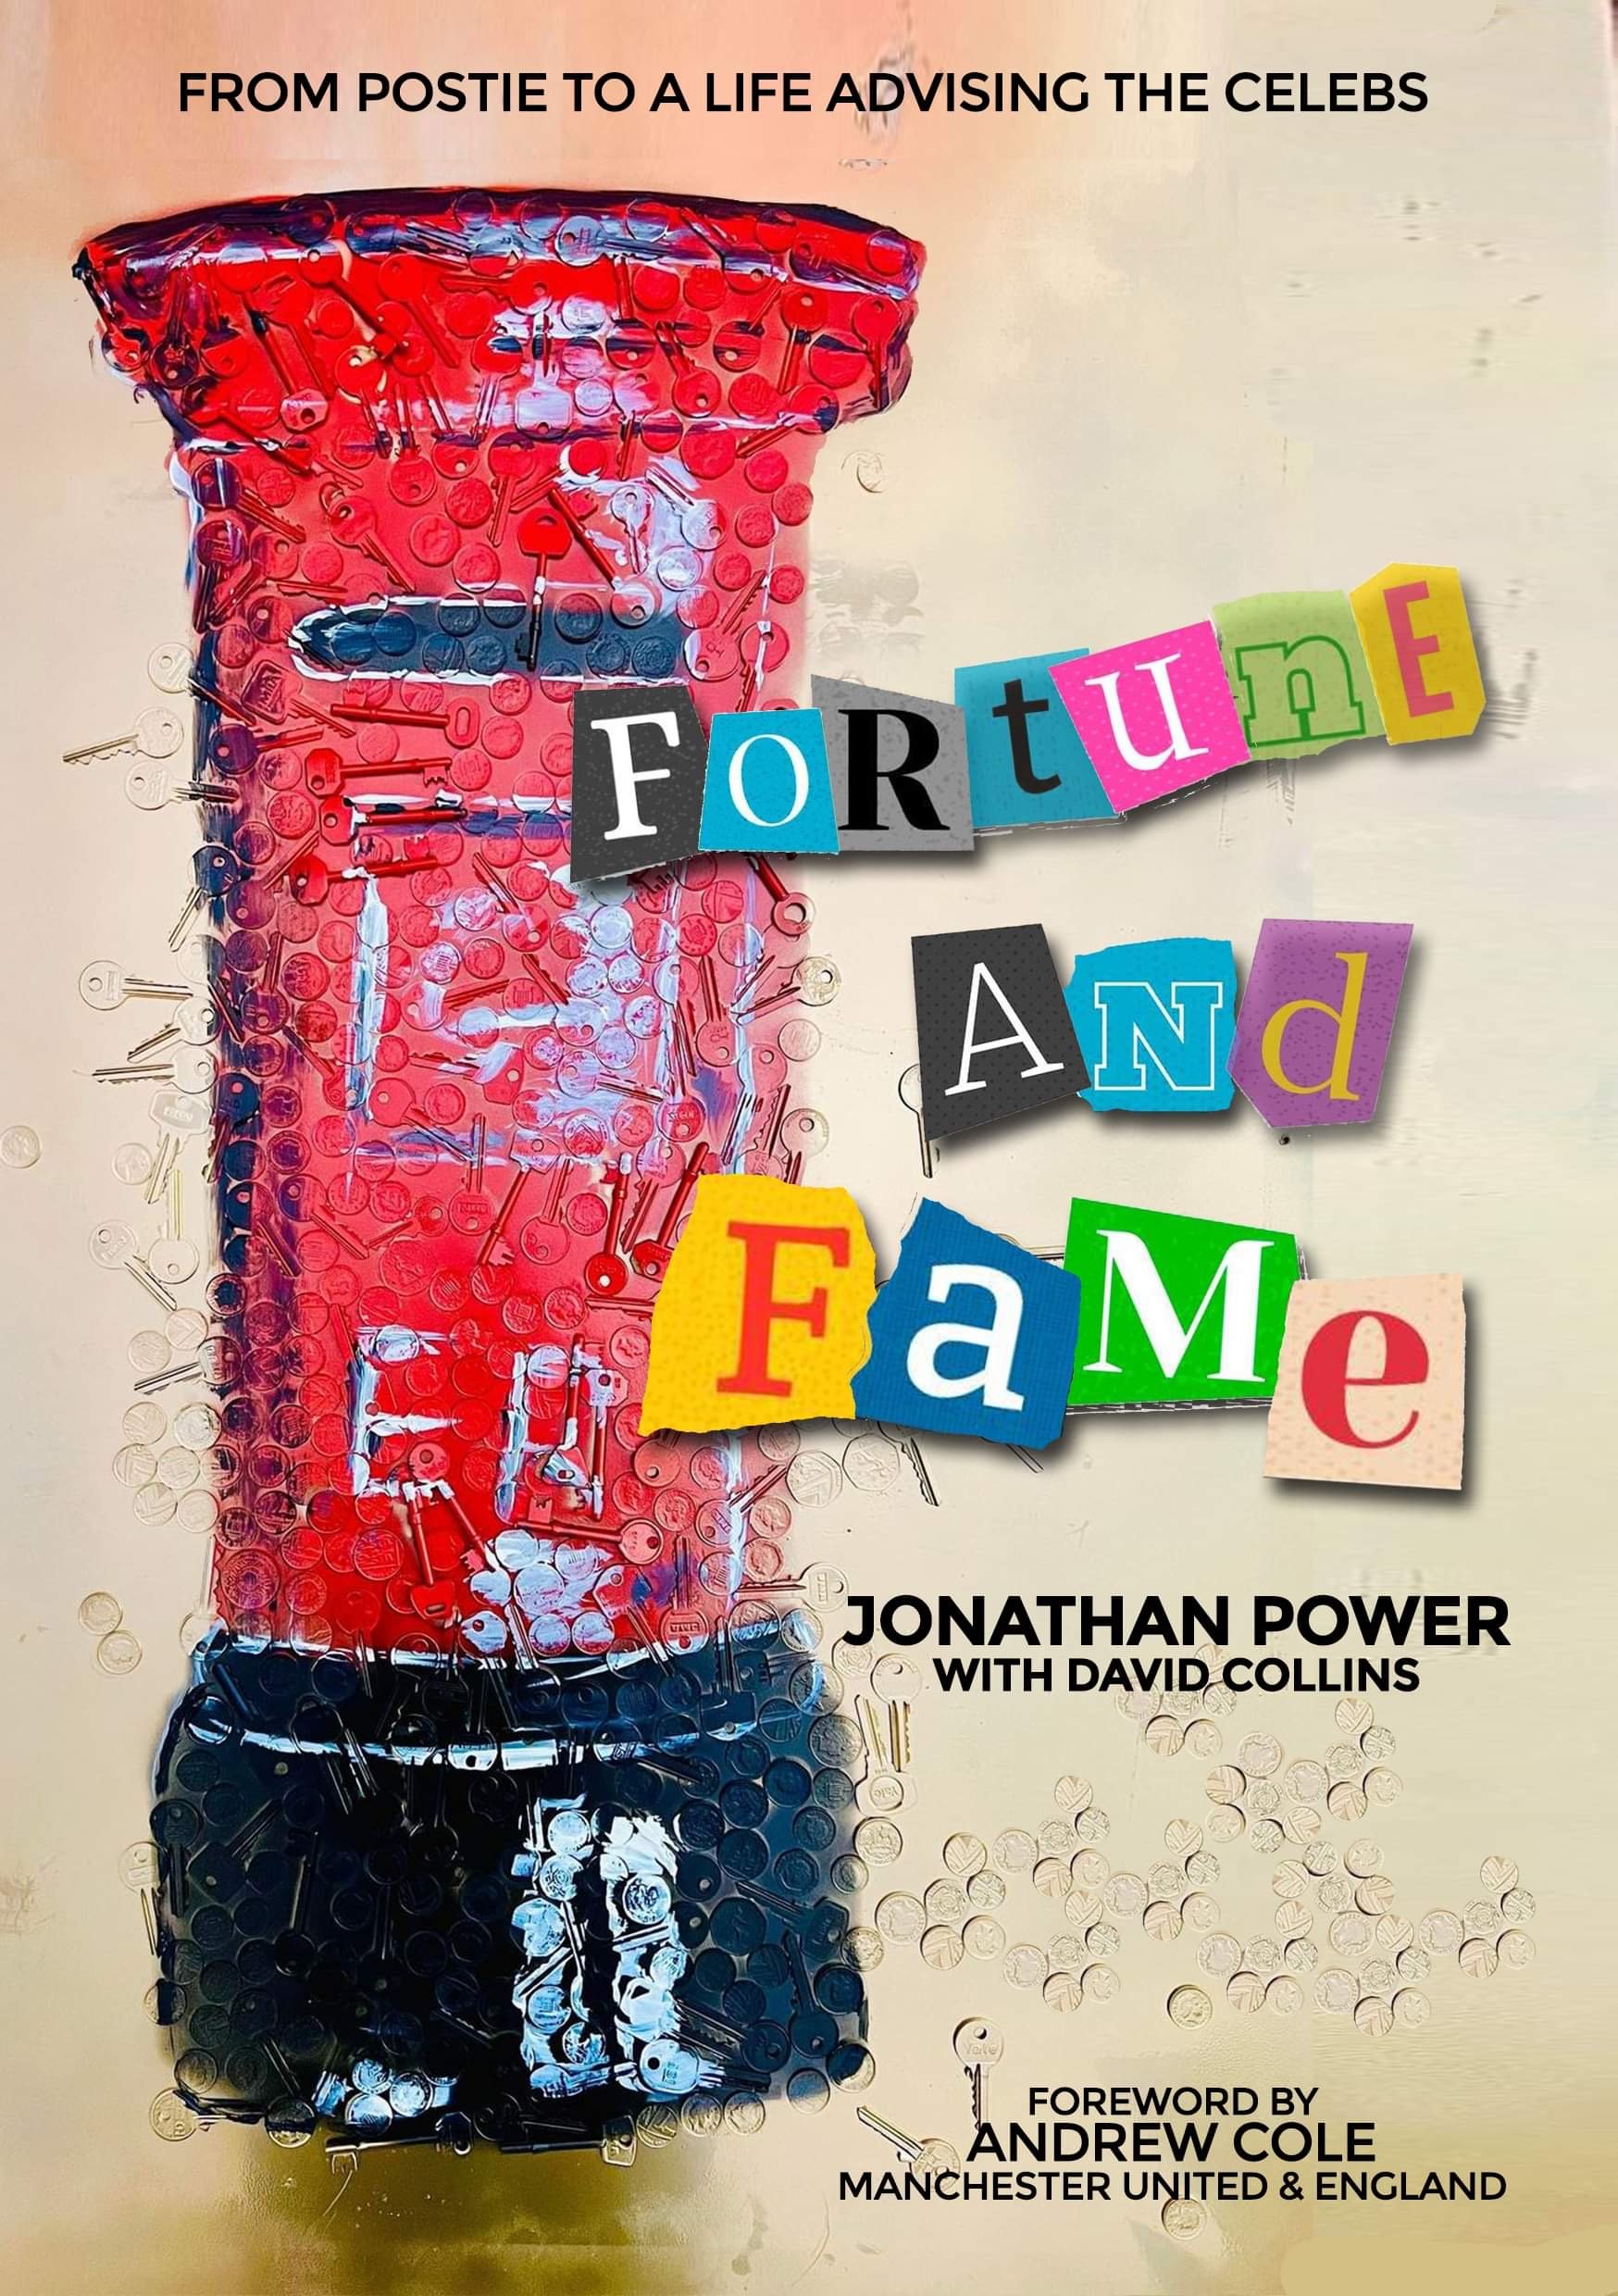 Fortune and Fame BOOK COVER ART